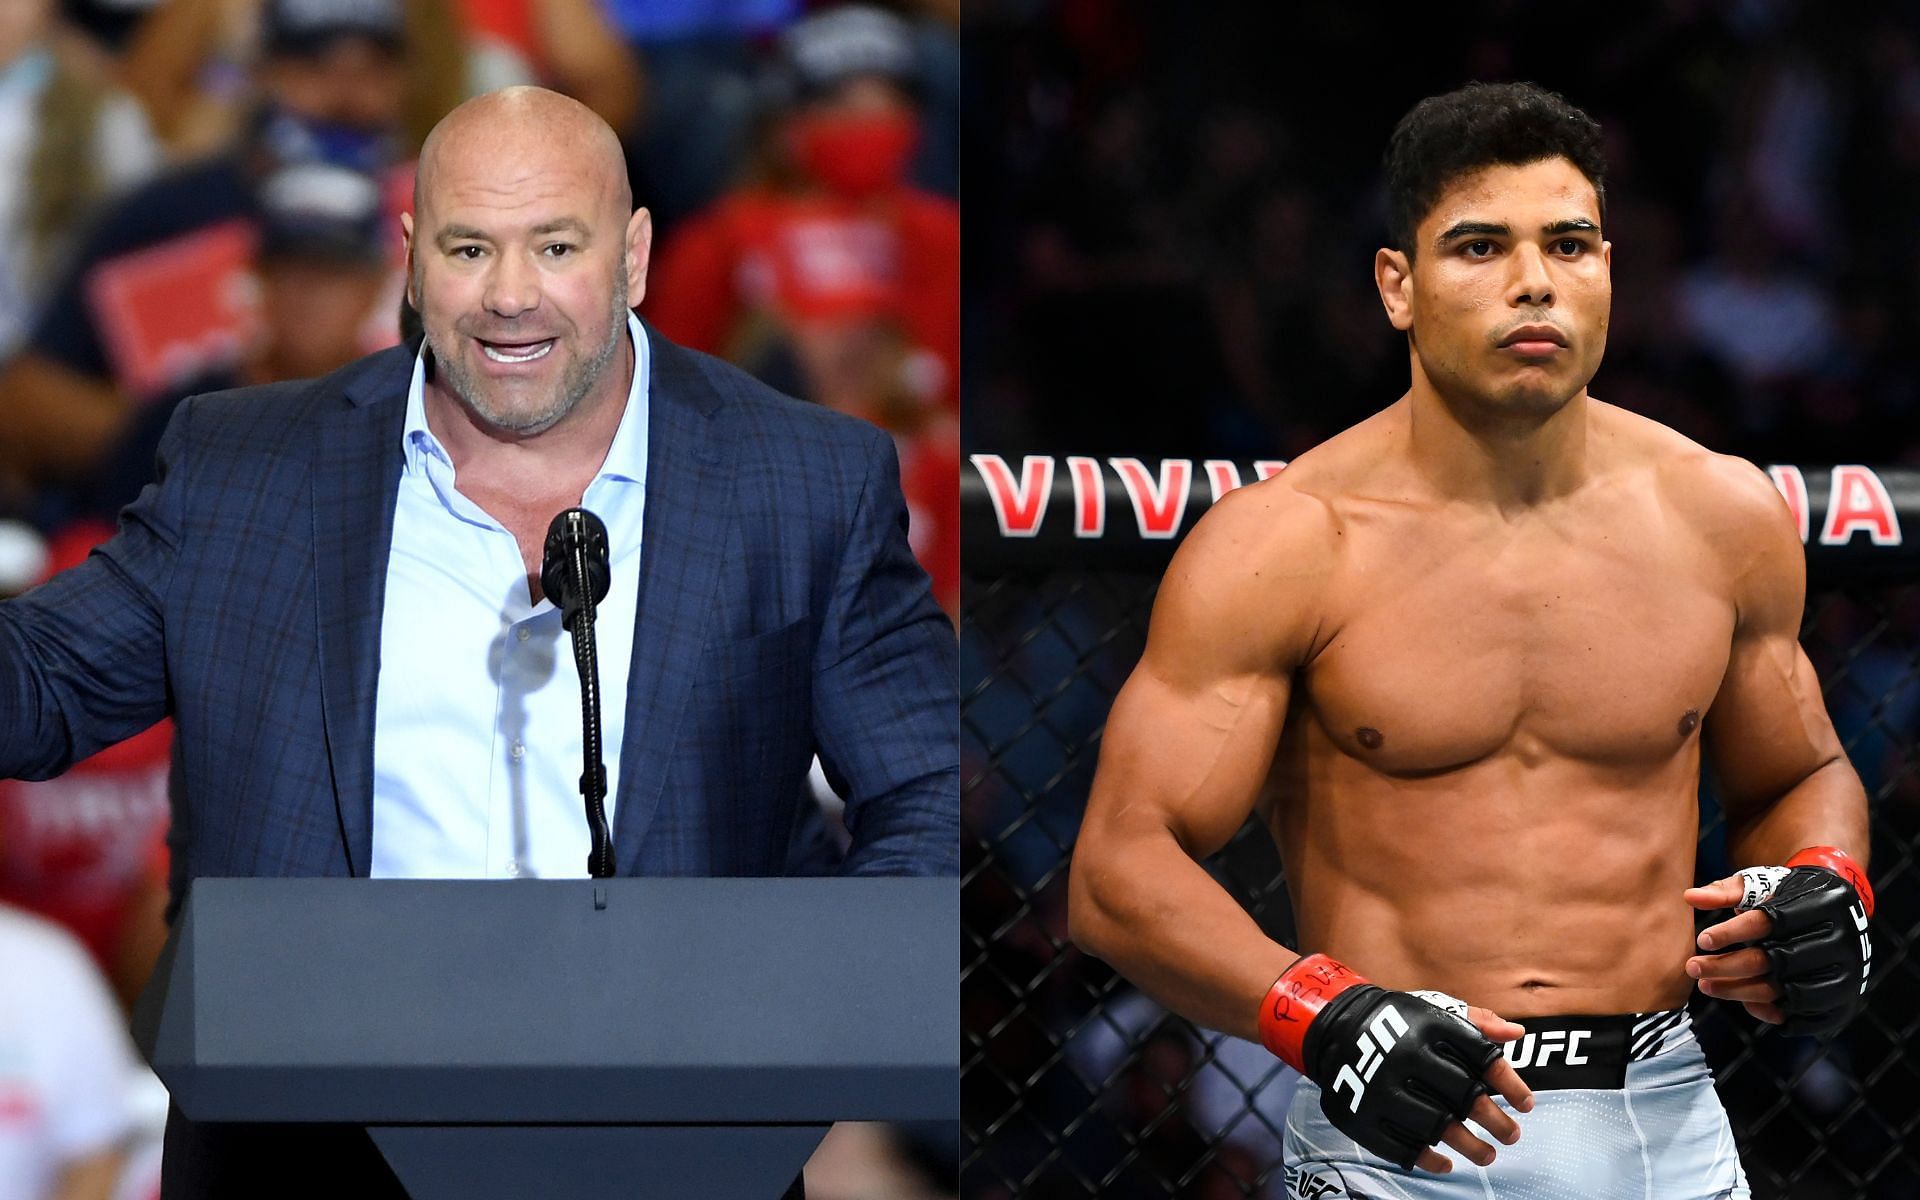 Dana White (left) and Paulo Costa (right) (Image credits Getty Images)